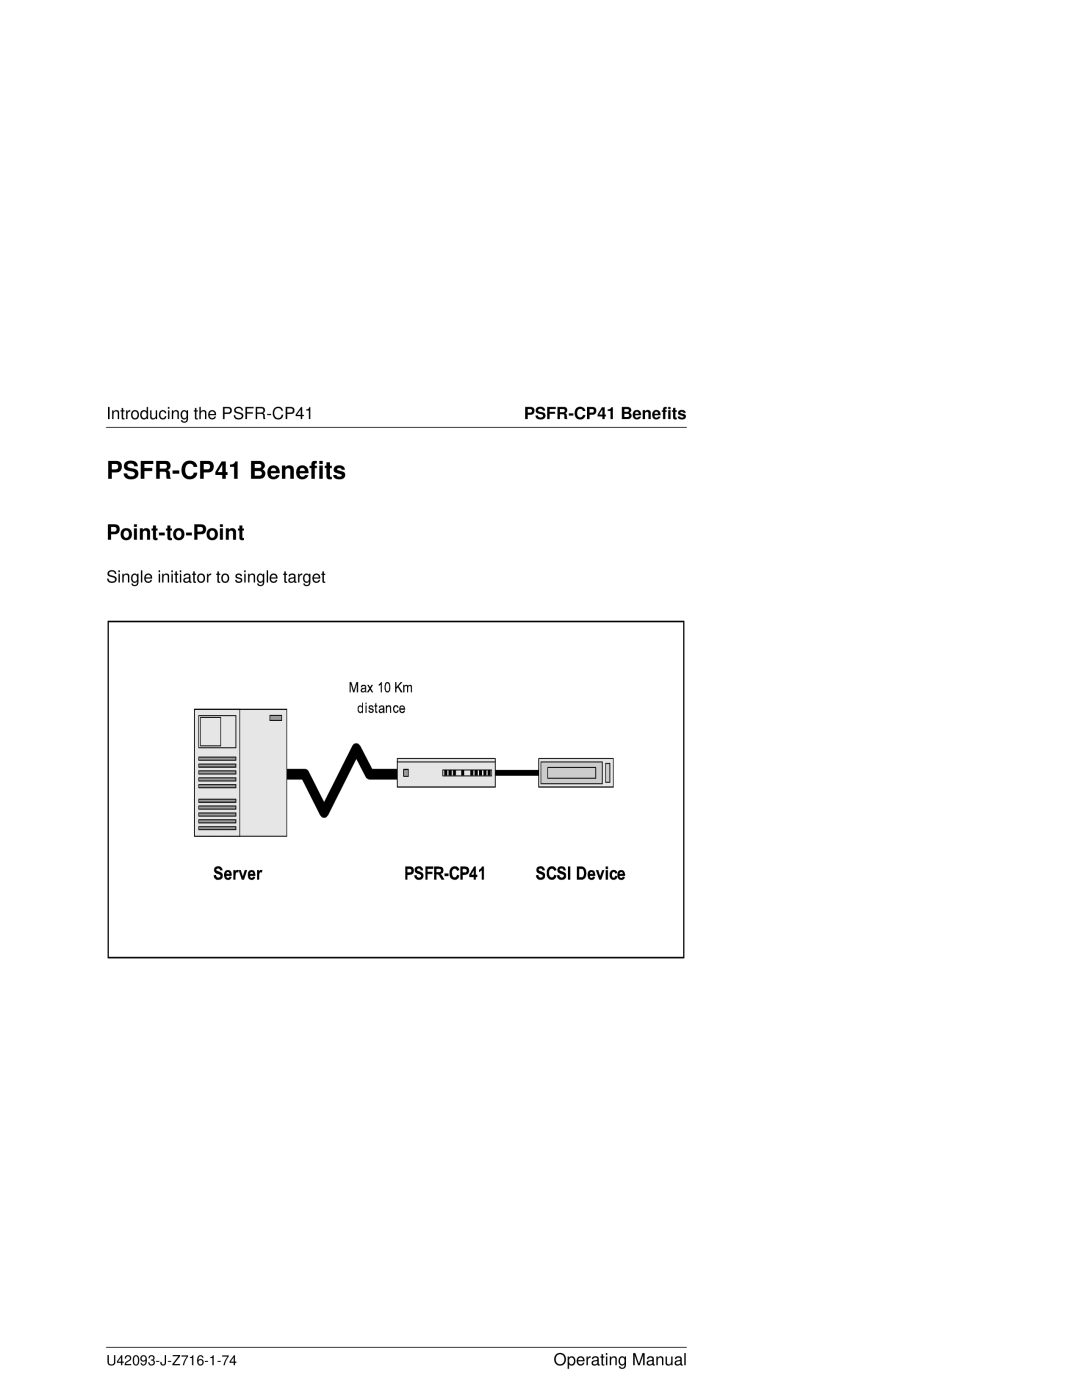 Siemens manual PSFR-CP41 Benefits, Point-to-Point, Introducing the PSFR-CP41 